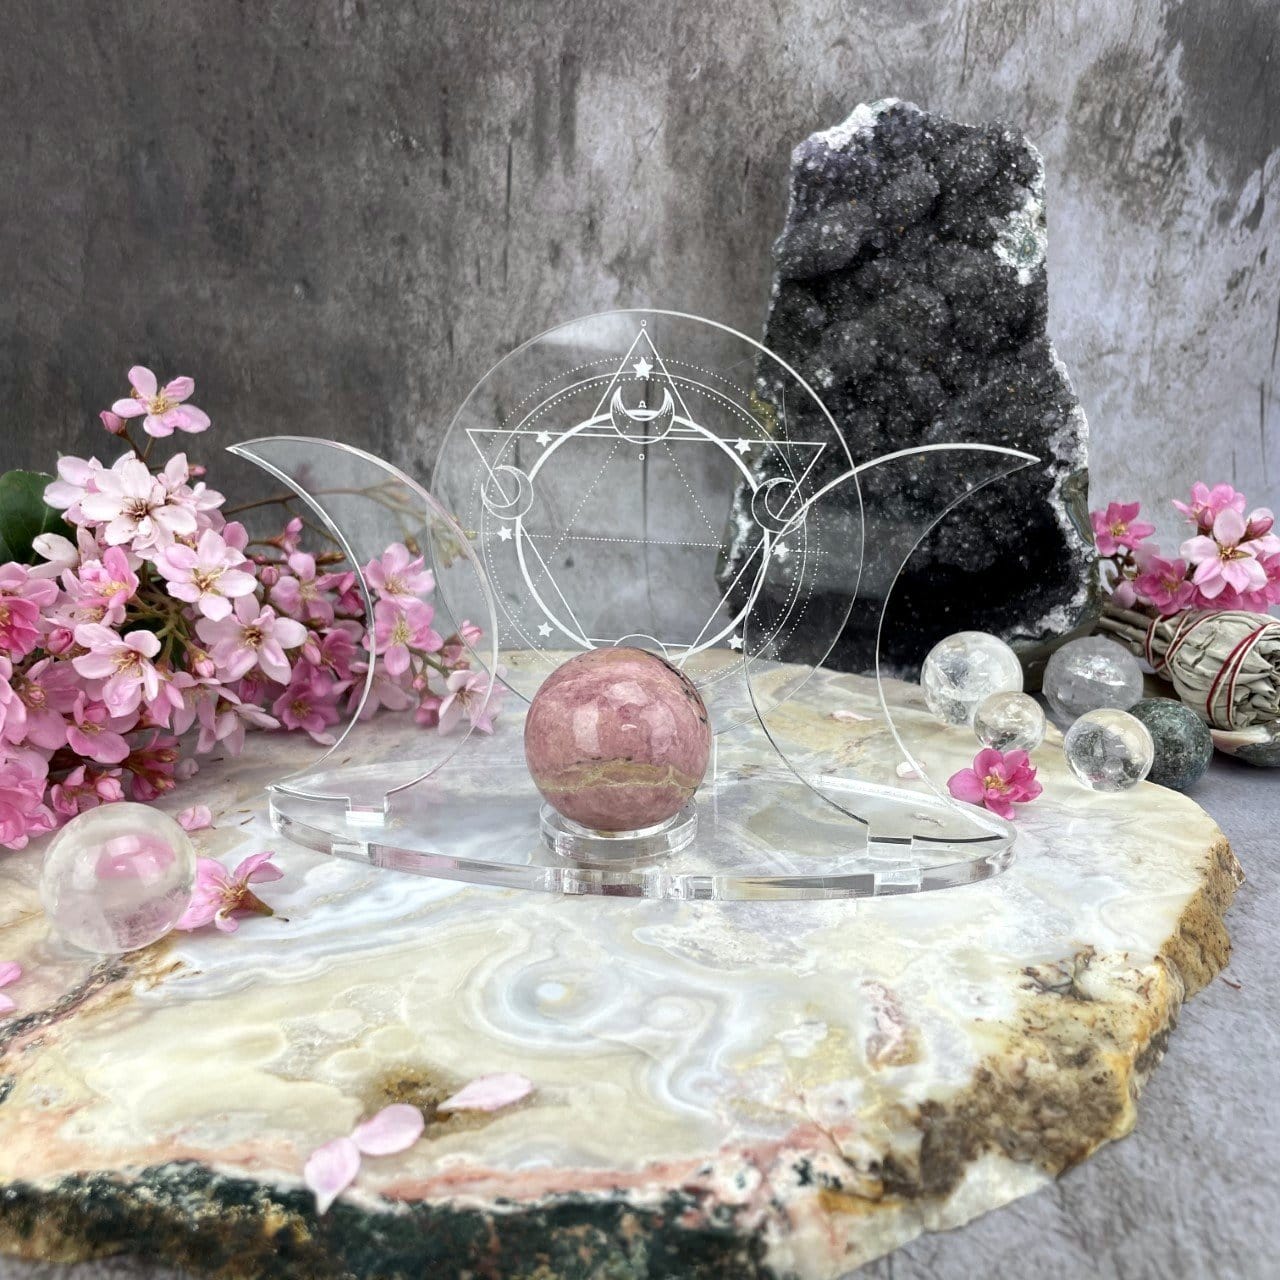 Acrylic Sphere Holder Crescent Moons - Six Pointed Star in an alter holding a sphere surrounded with crystals and flowers for display.